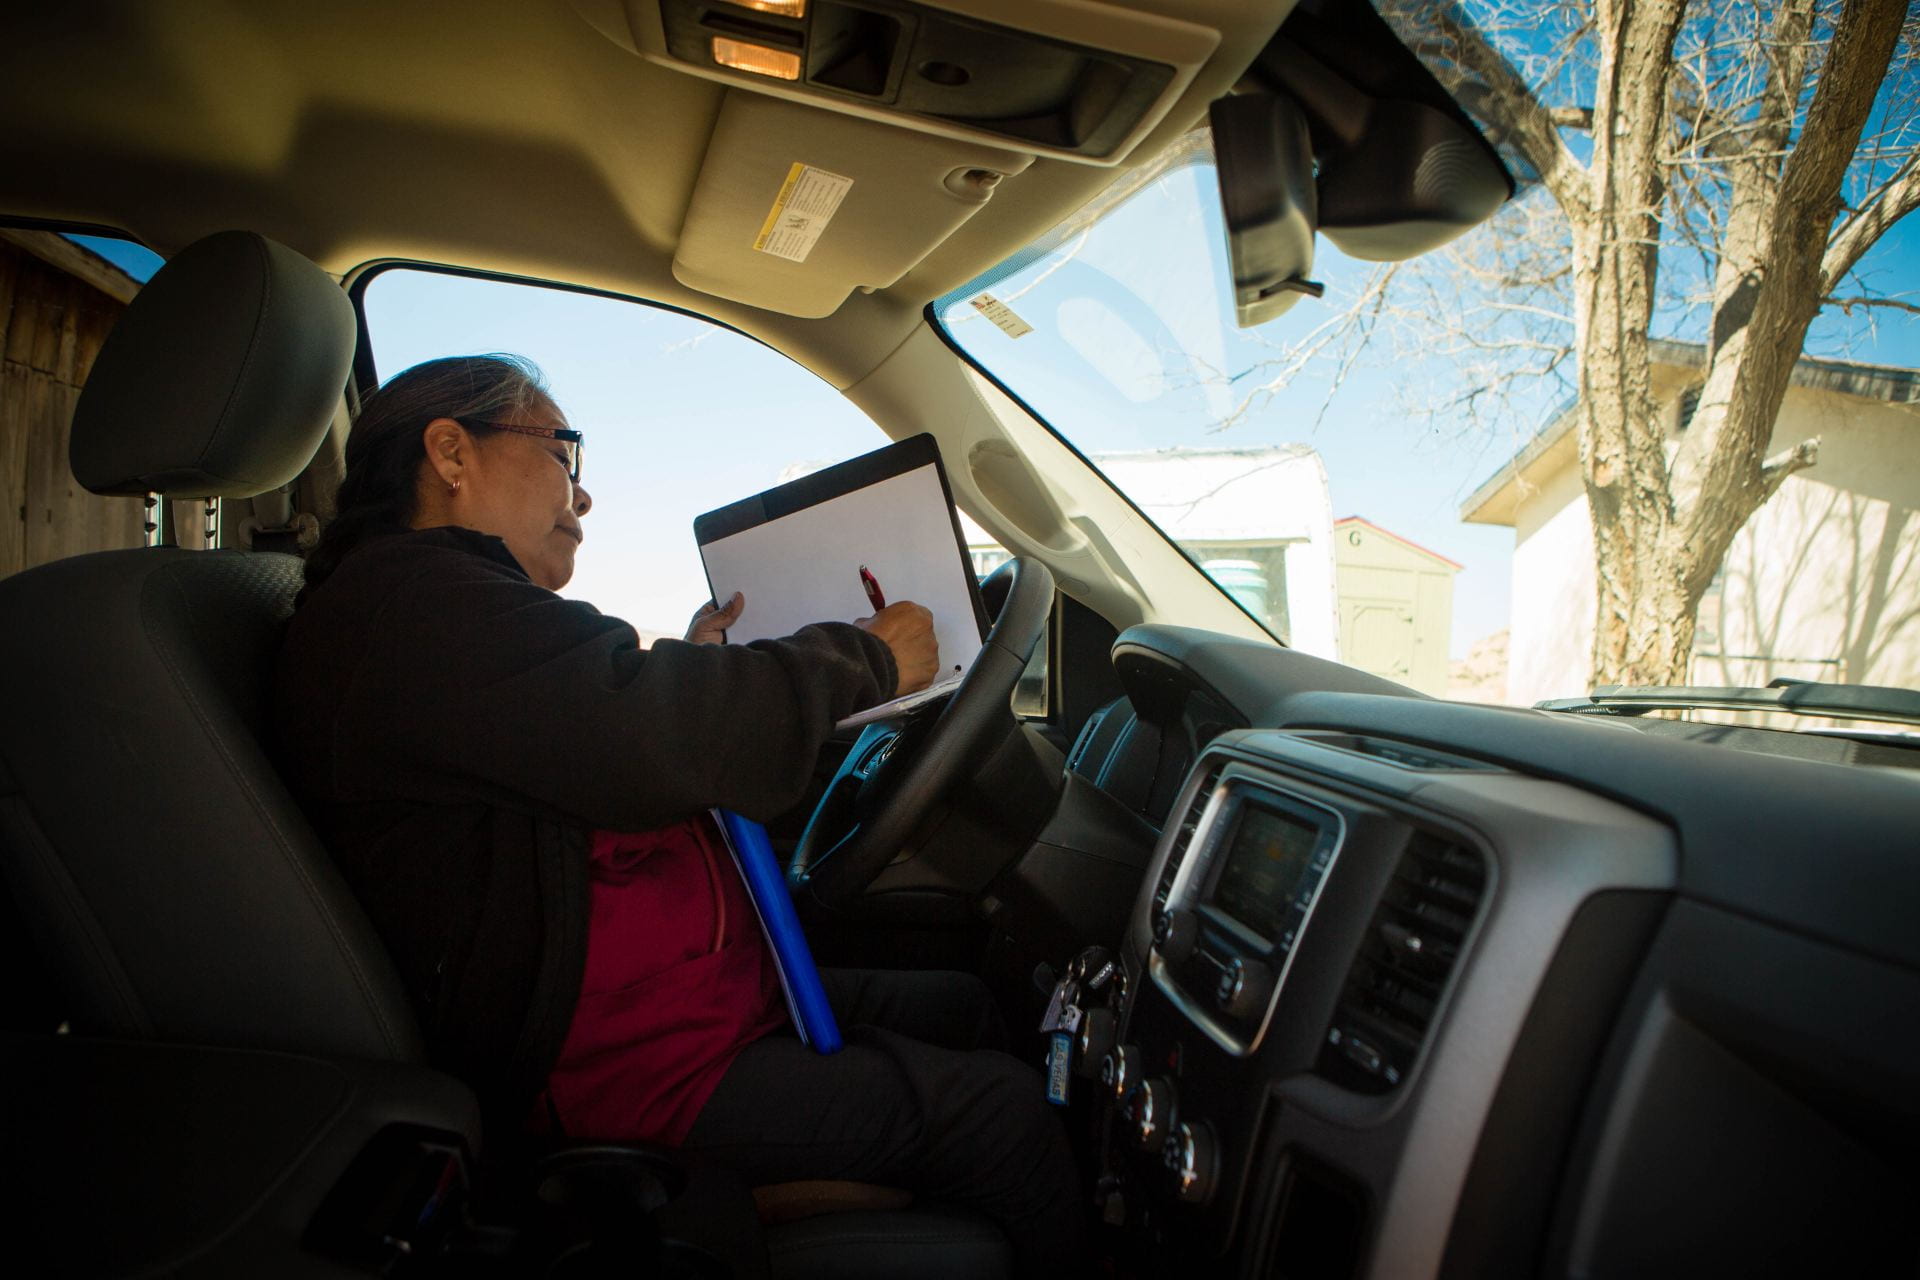 community health worker taking notes on the steering wheel of her car
